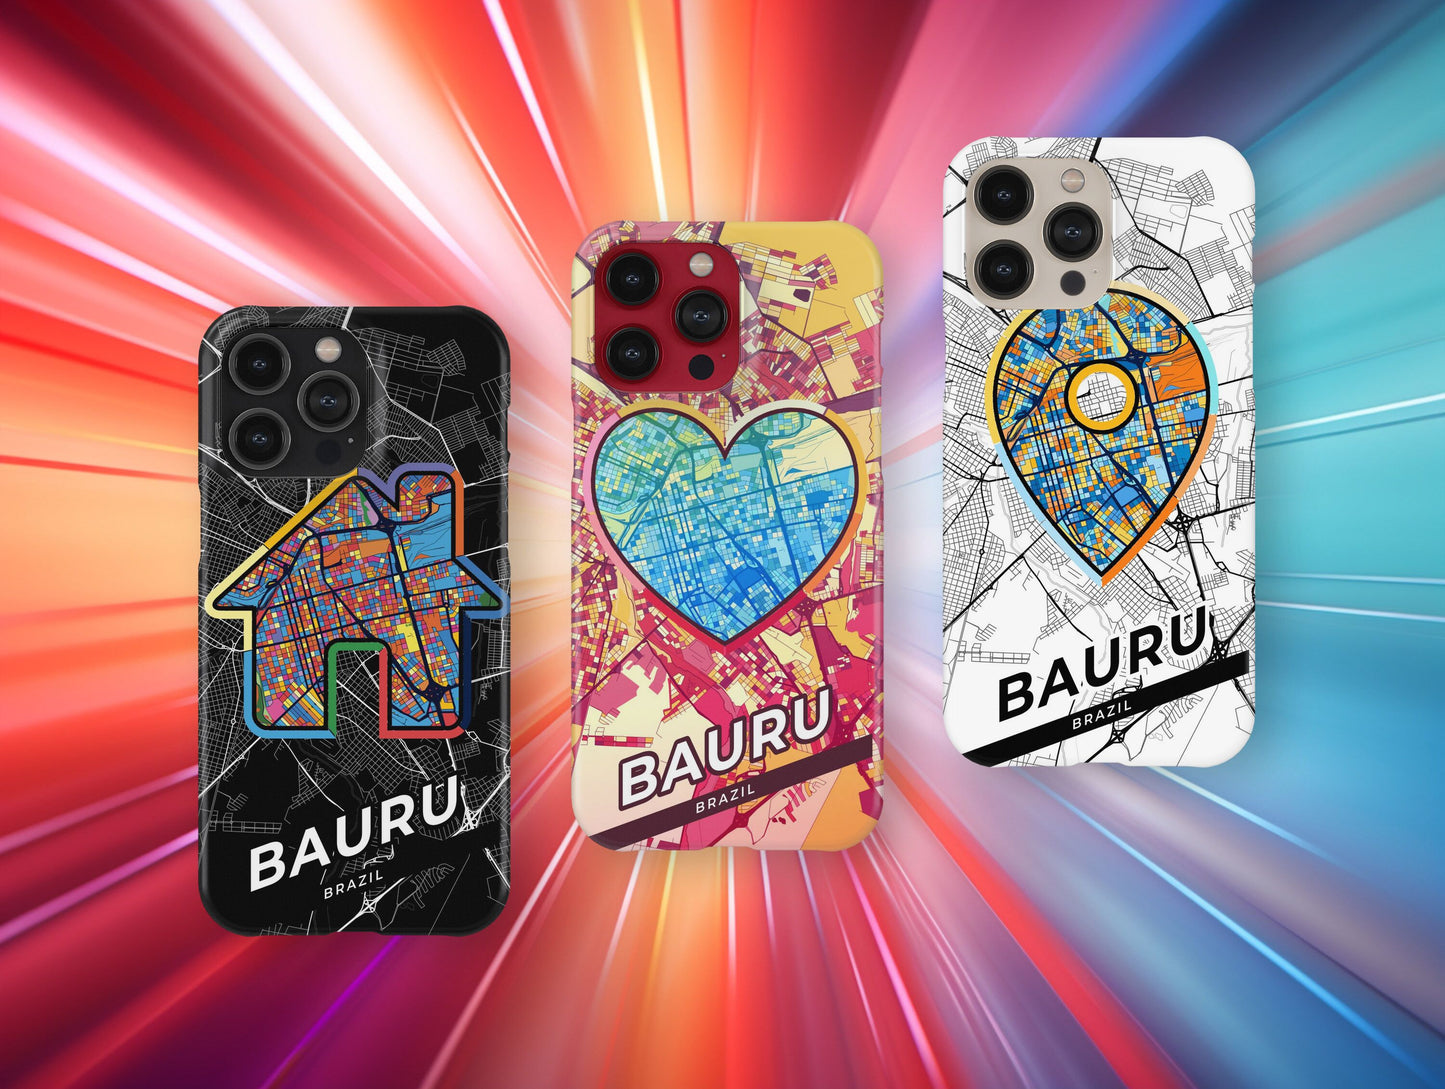 Bauru Brazil slim phone case with colorful icon. Birthday, wedding or housewarming gift. Couple match cases.